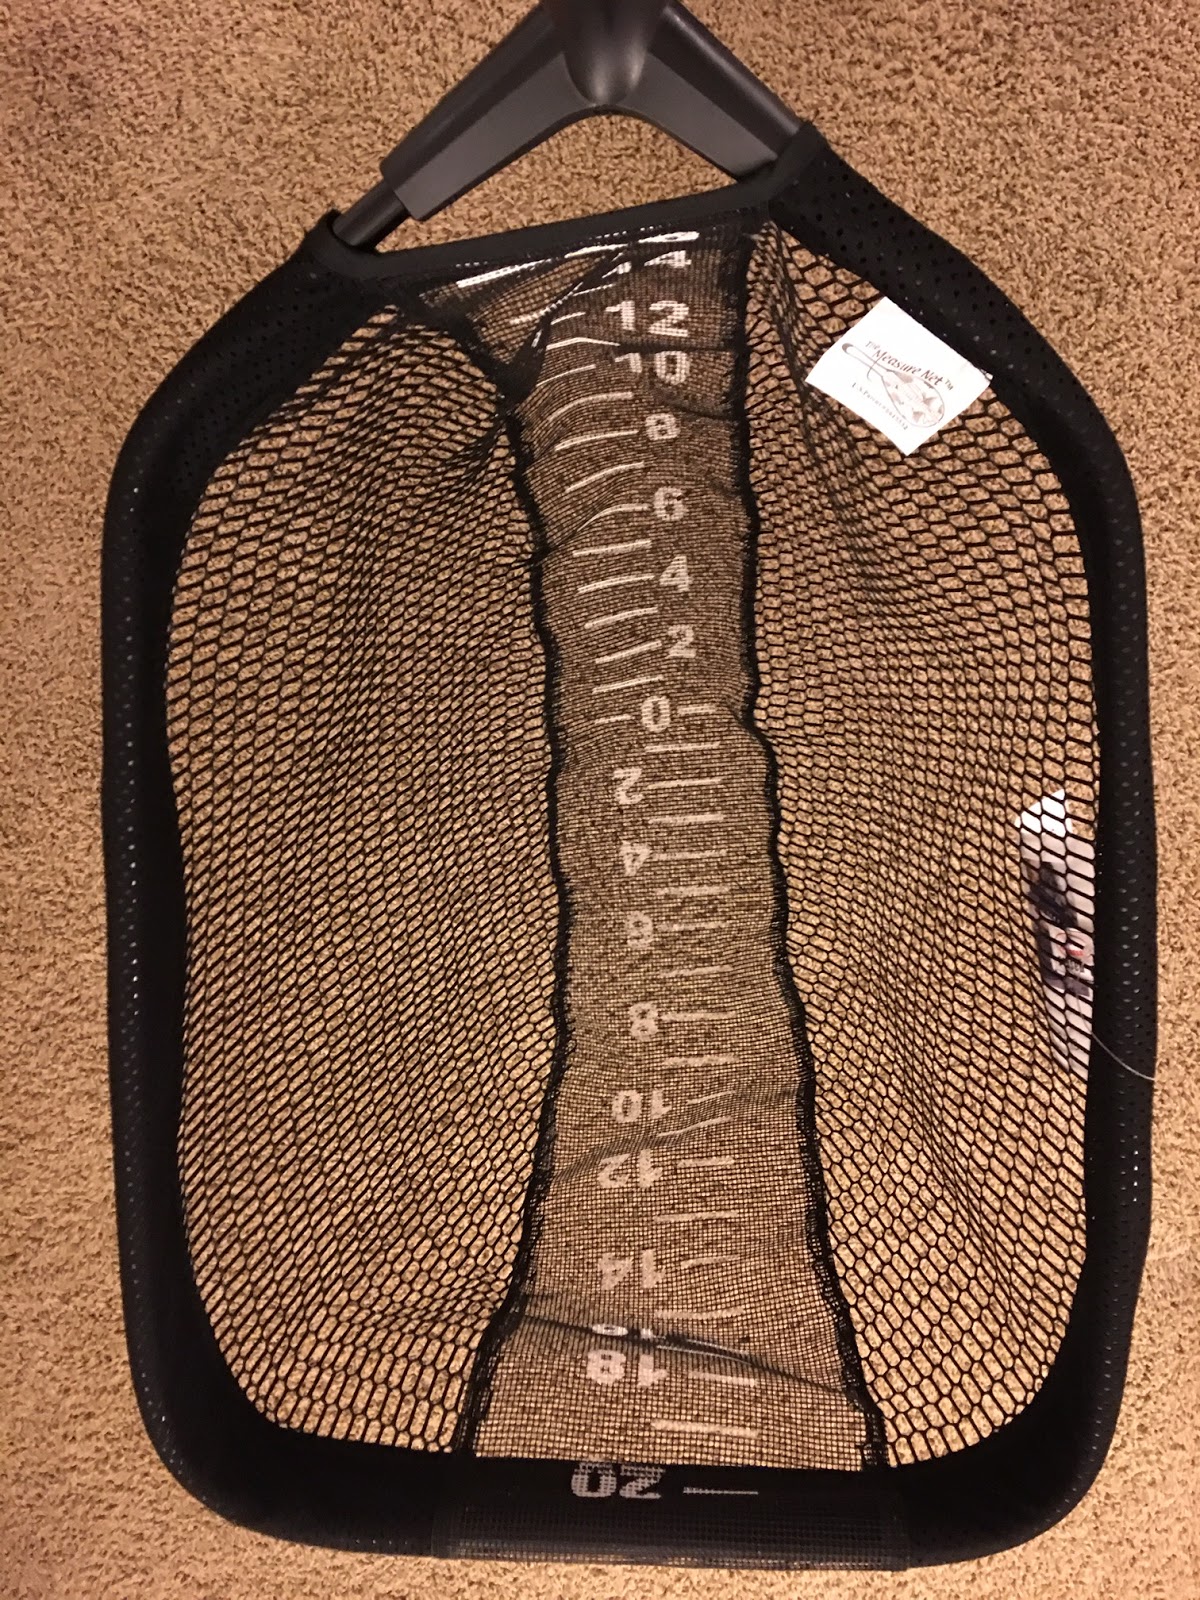 California Fishing Blog: This Trout Fishing Net Holds a Child!